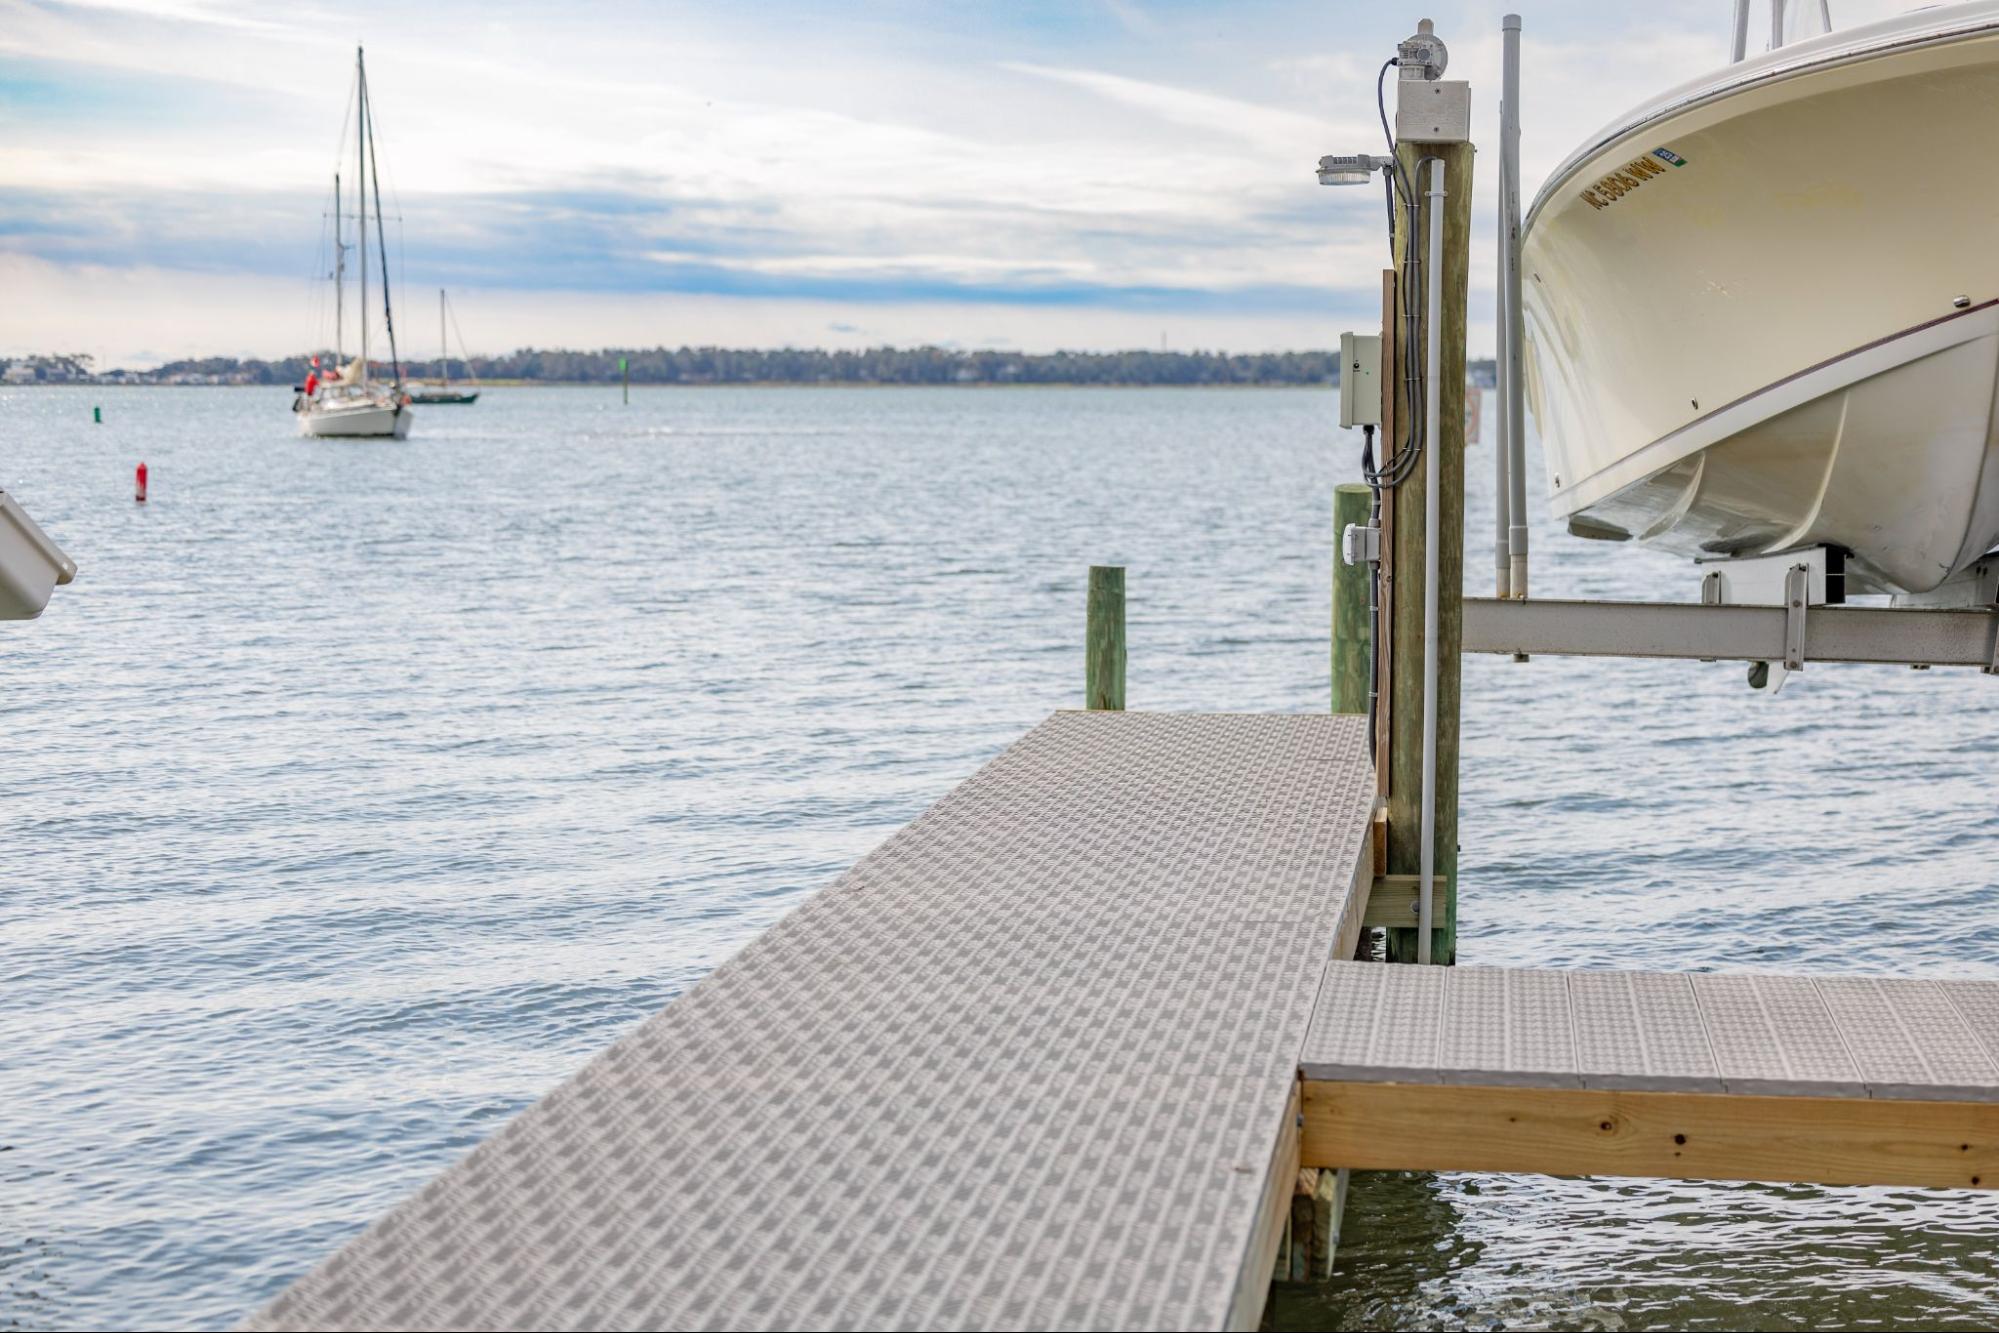 The photo depicts a dock with a boat lift. There are two sailboats on the horizon line. 